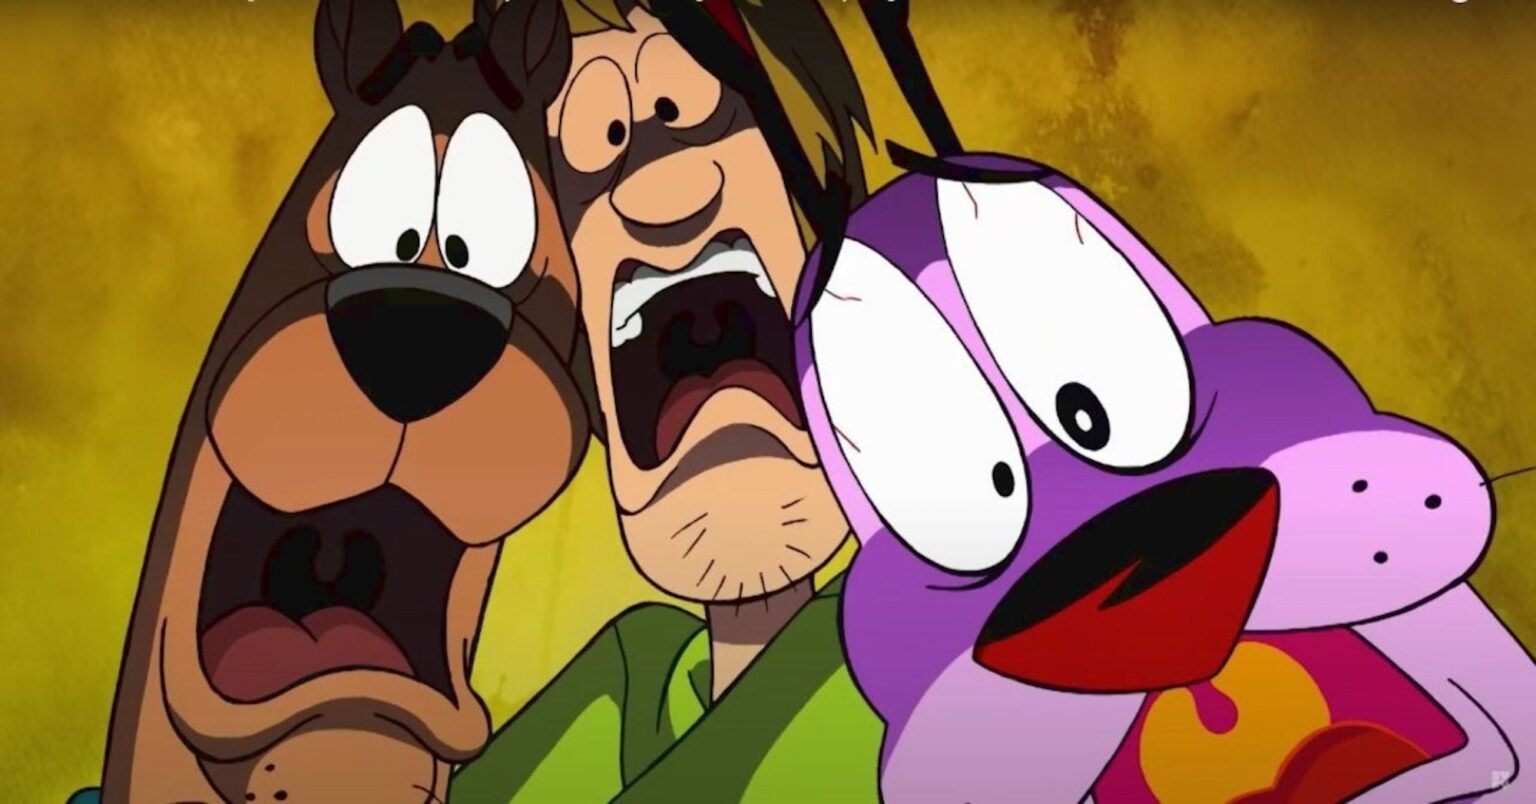 Scooby-Doo meets Courage the Cowardly Dog in the newest movie. See if these two lovable scaredy dogs can save the world (or Nowhere).